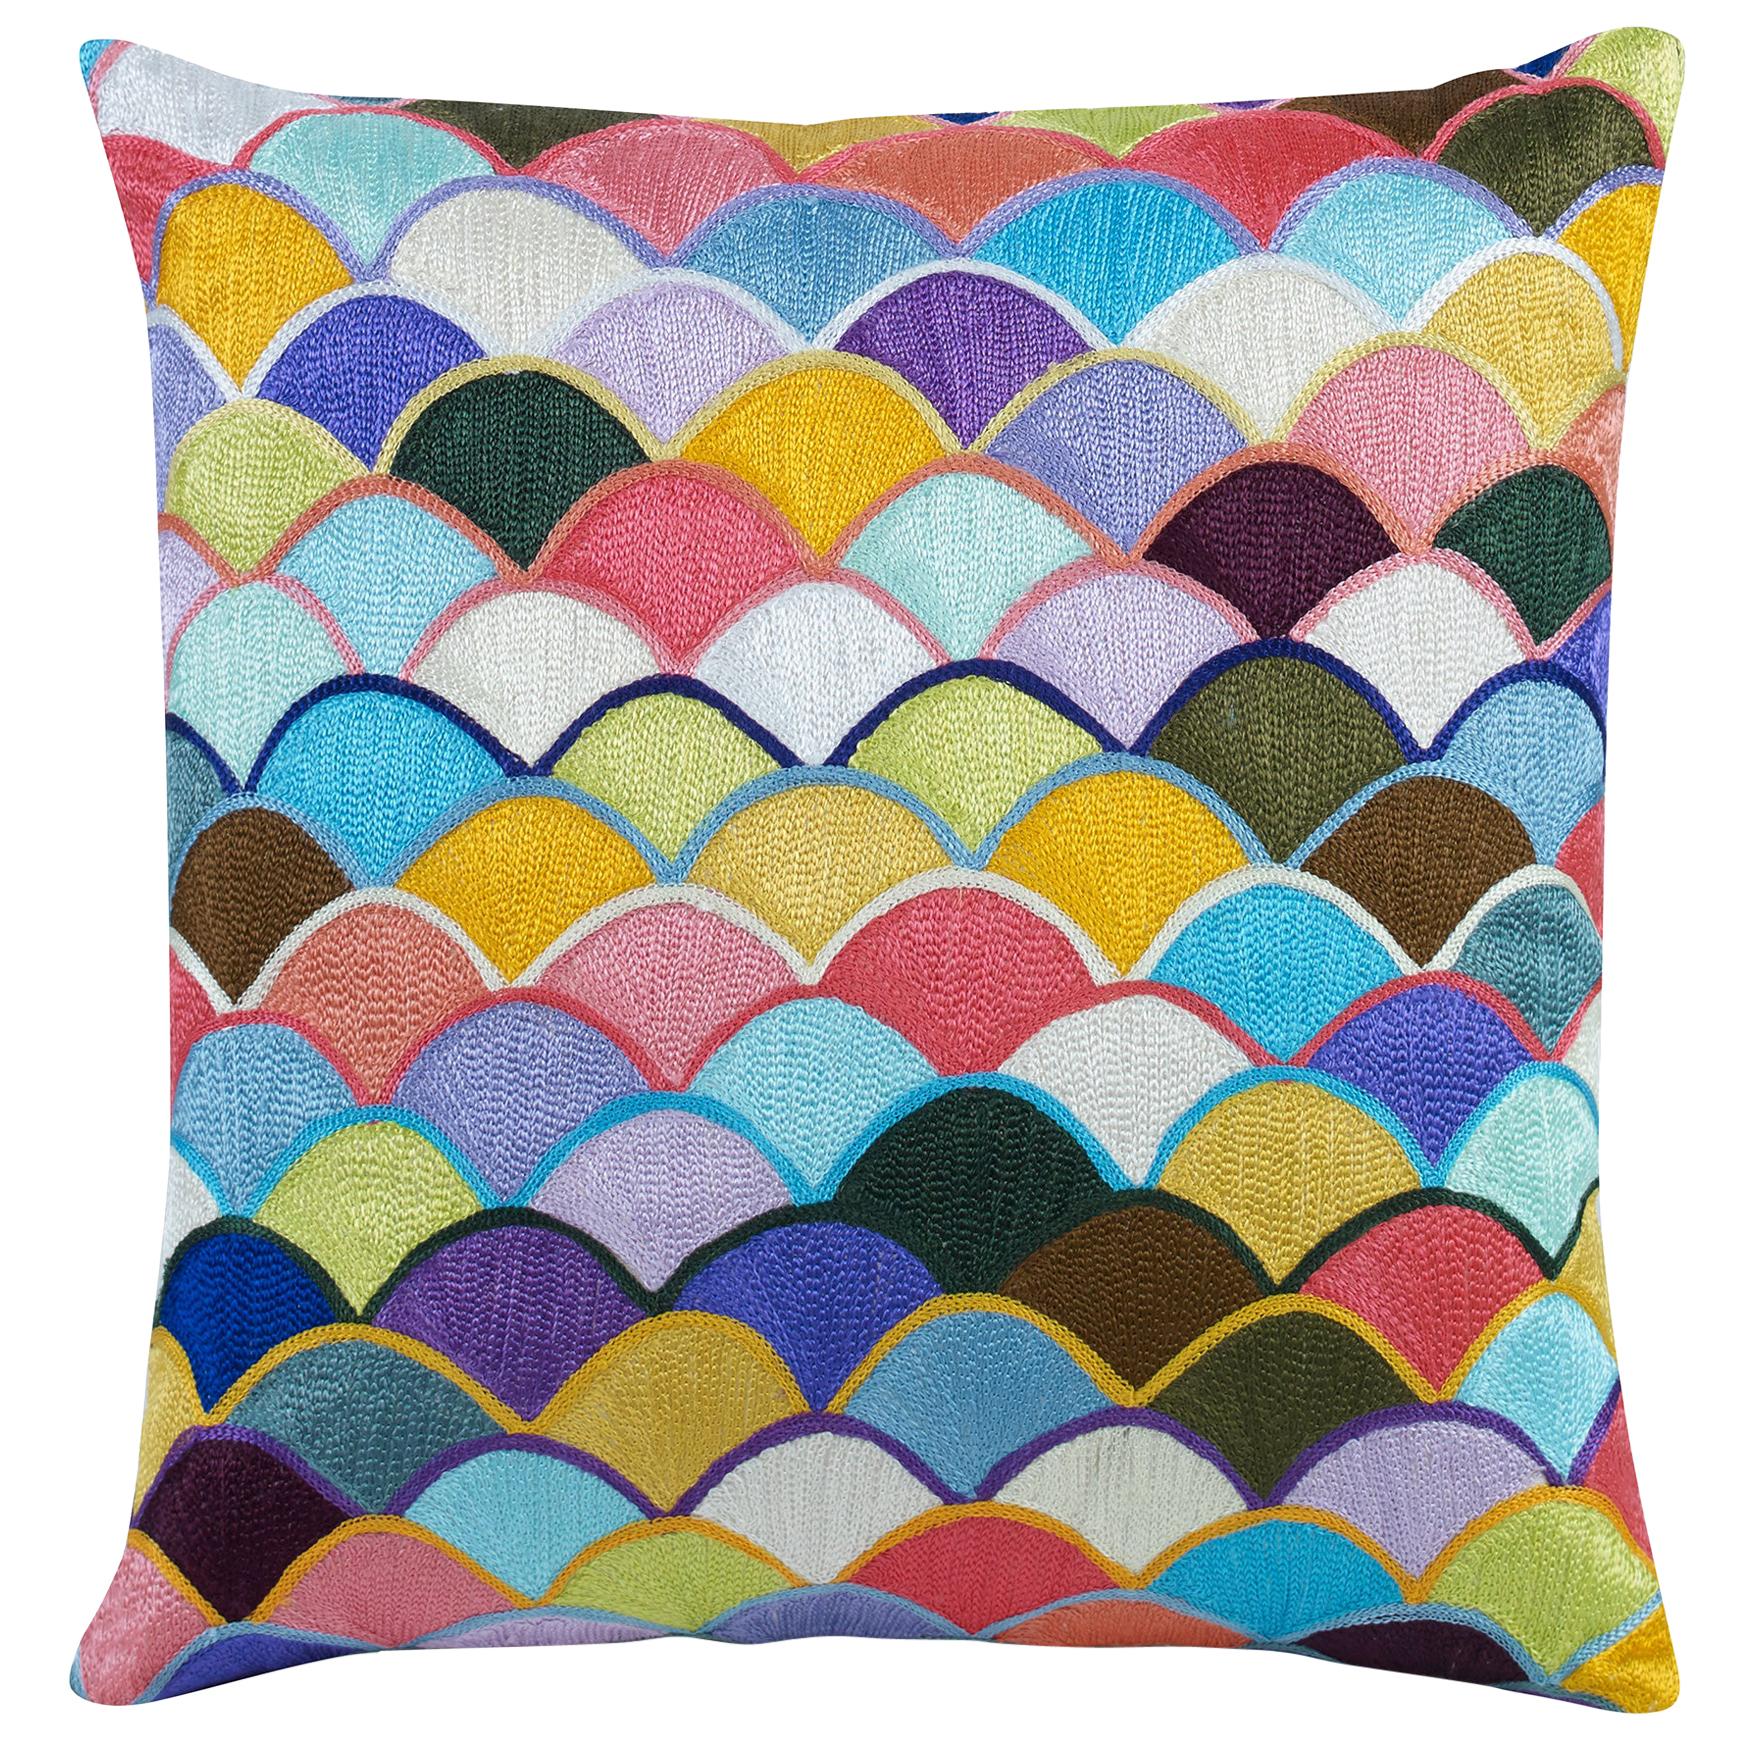 Clovis Colorful Accent Pillow by CuratedKravet